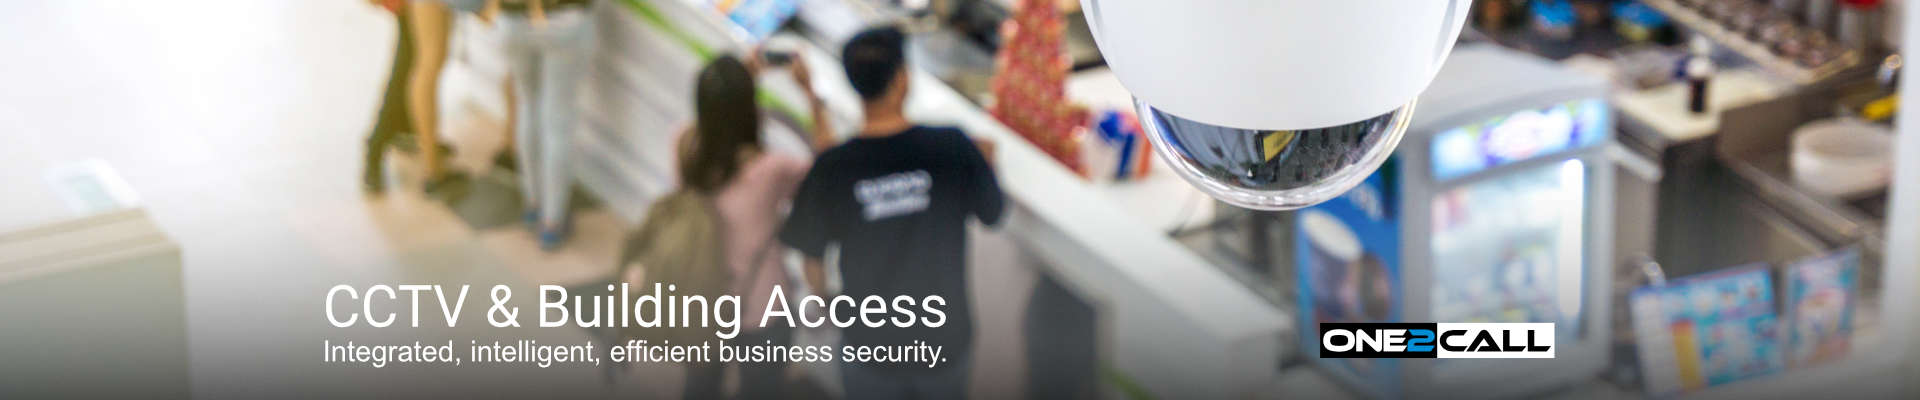 CCTV & Access - Integrated, intelligent, efficient business security.